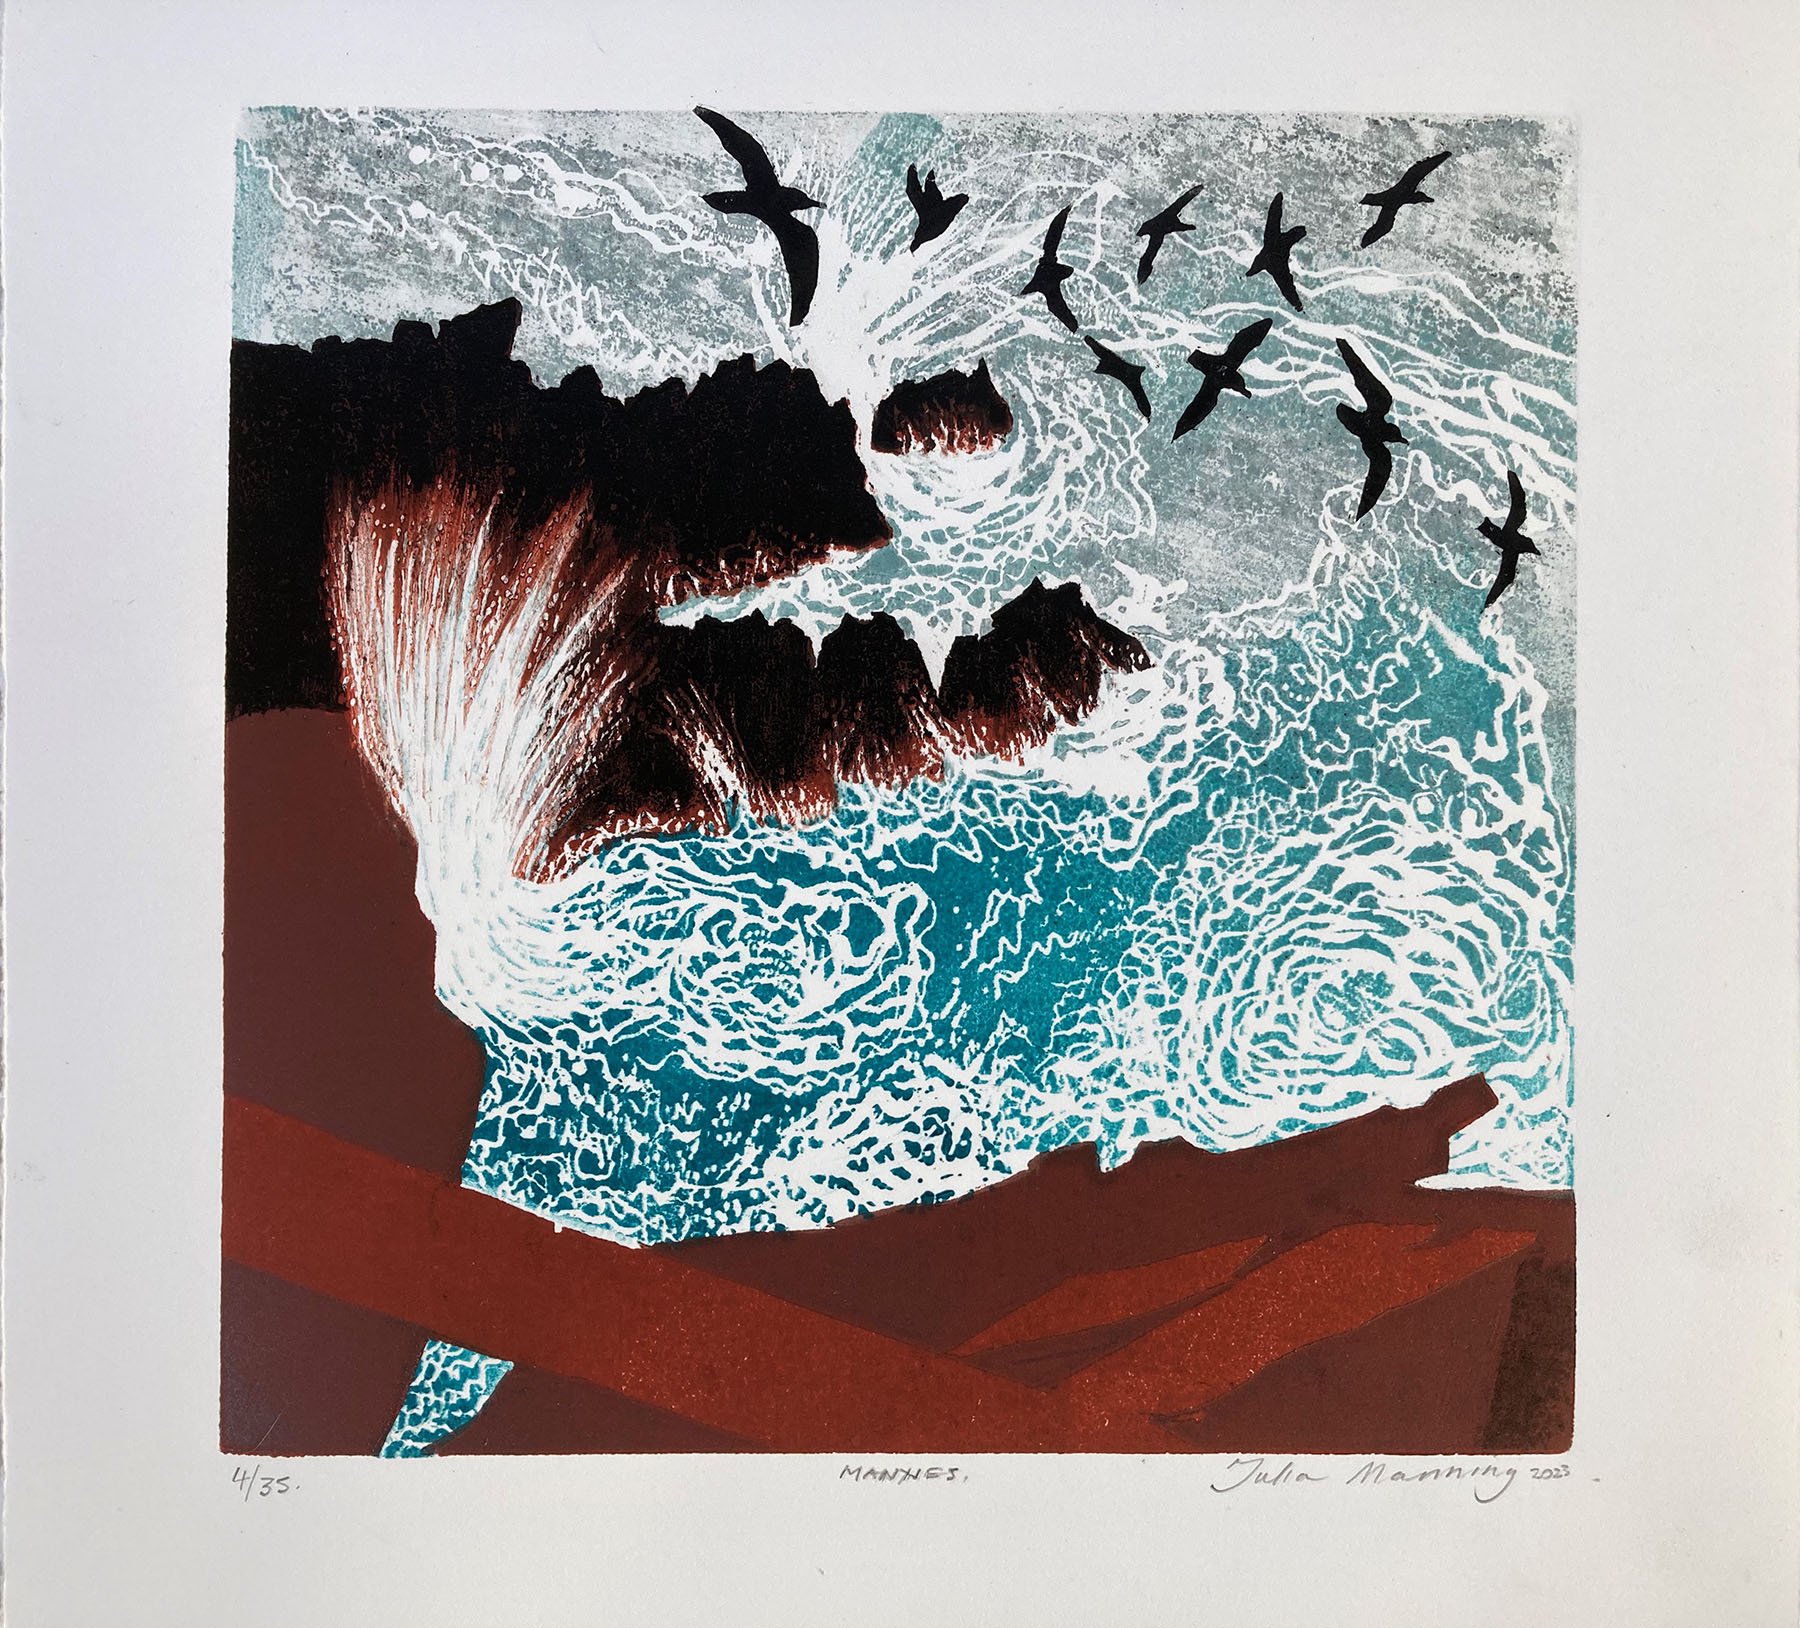 Julia Manning, Manxies. Wood and Linocuts. Image size: 30 x 30 cm. ©2023 Julia Manning. Courtesy of the Makers Guild in Wales.